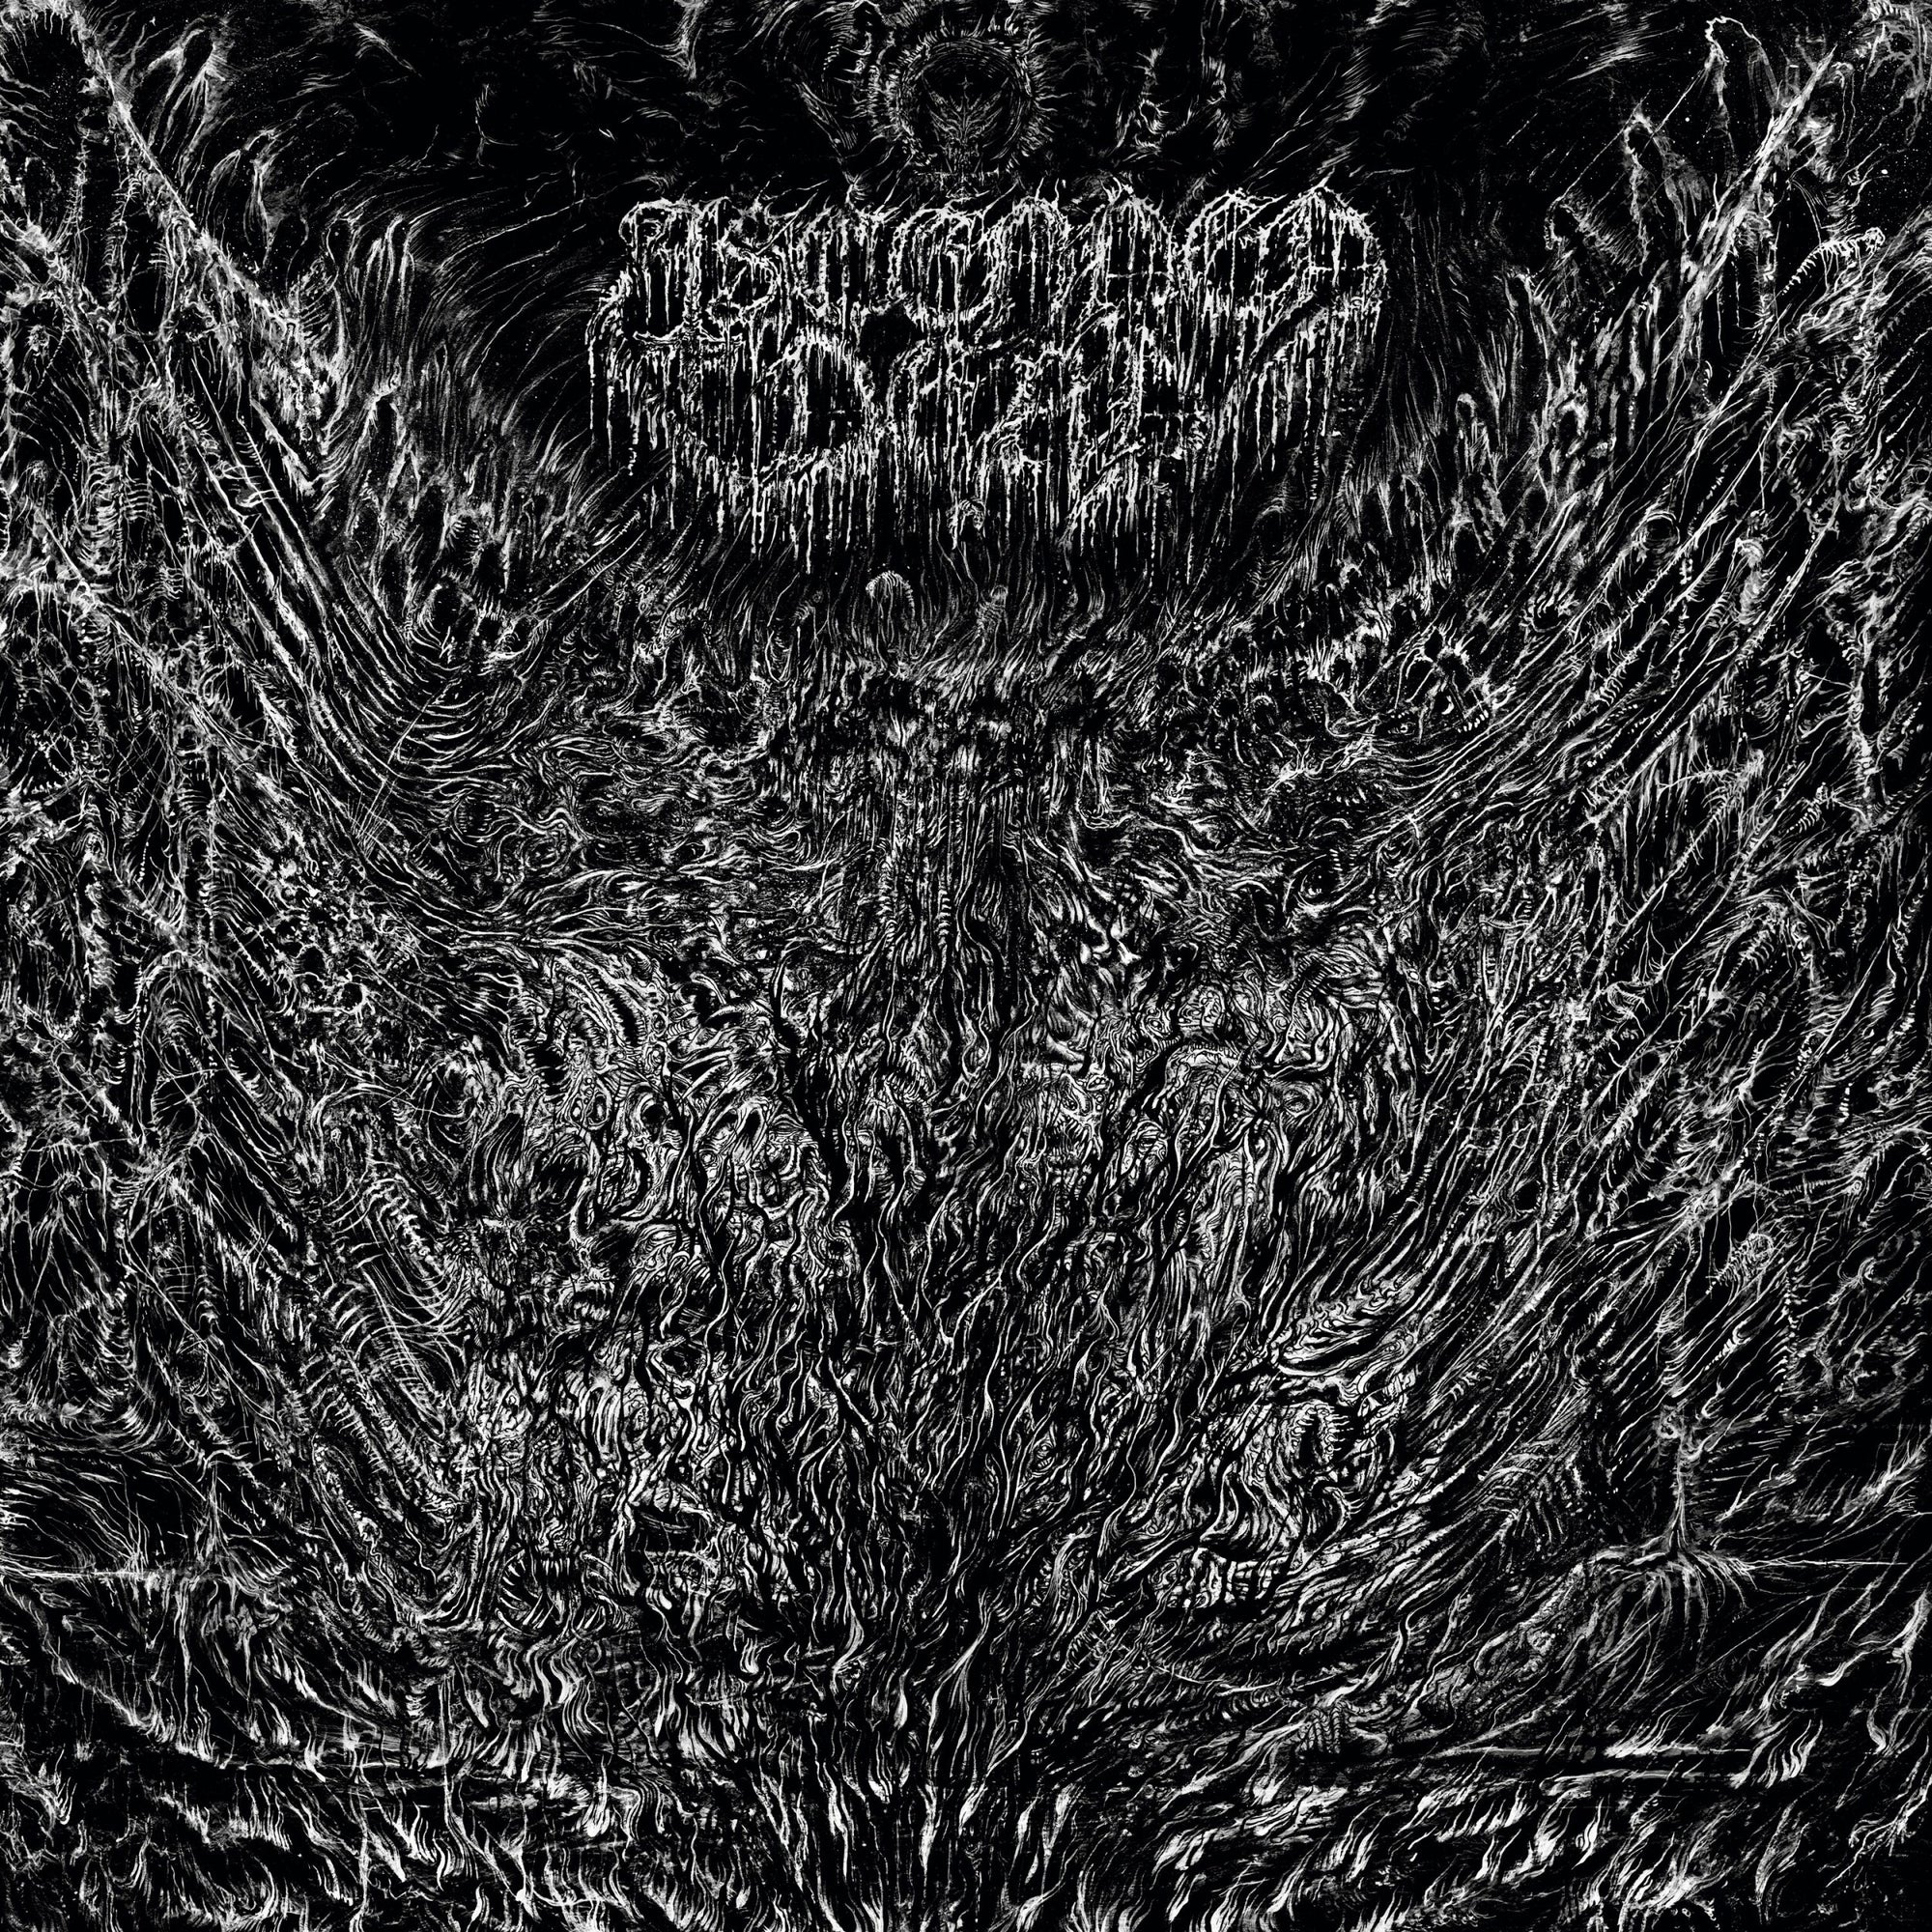 ASCENDED DEAD "Evenfall Of The Apocalypse" LP